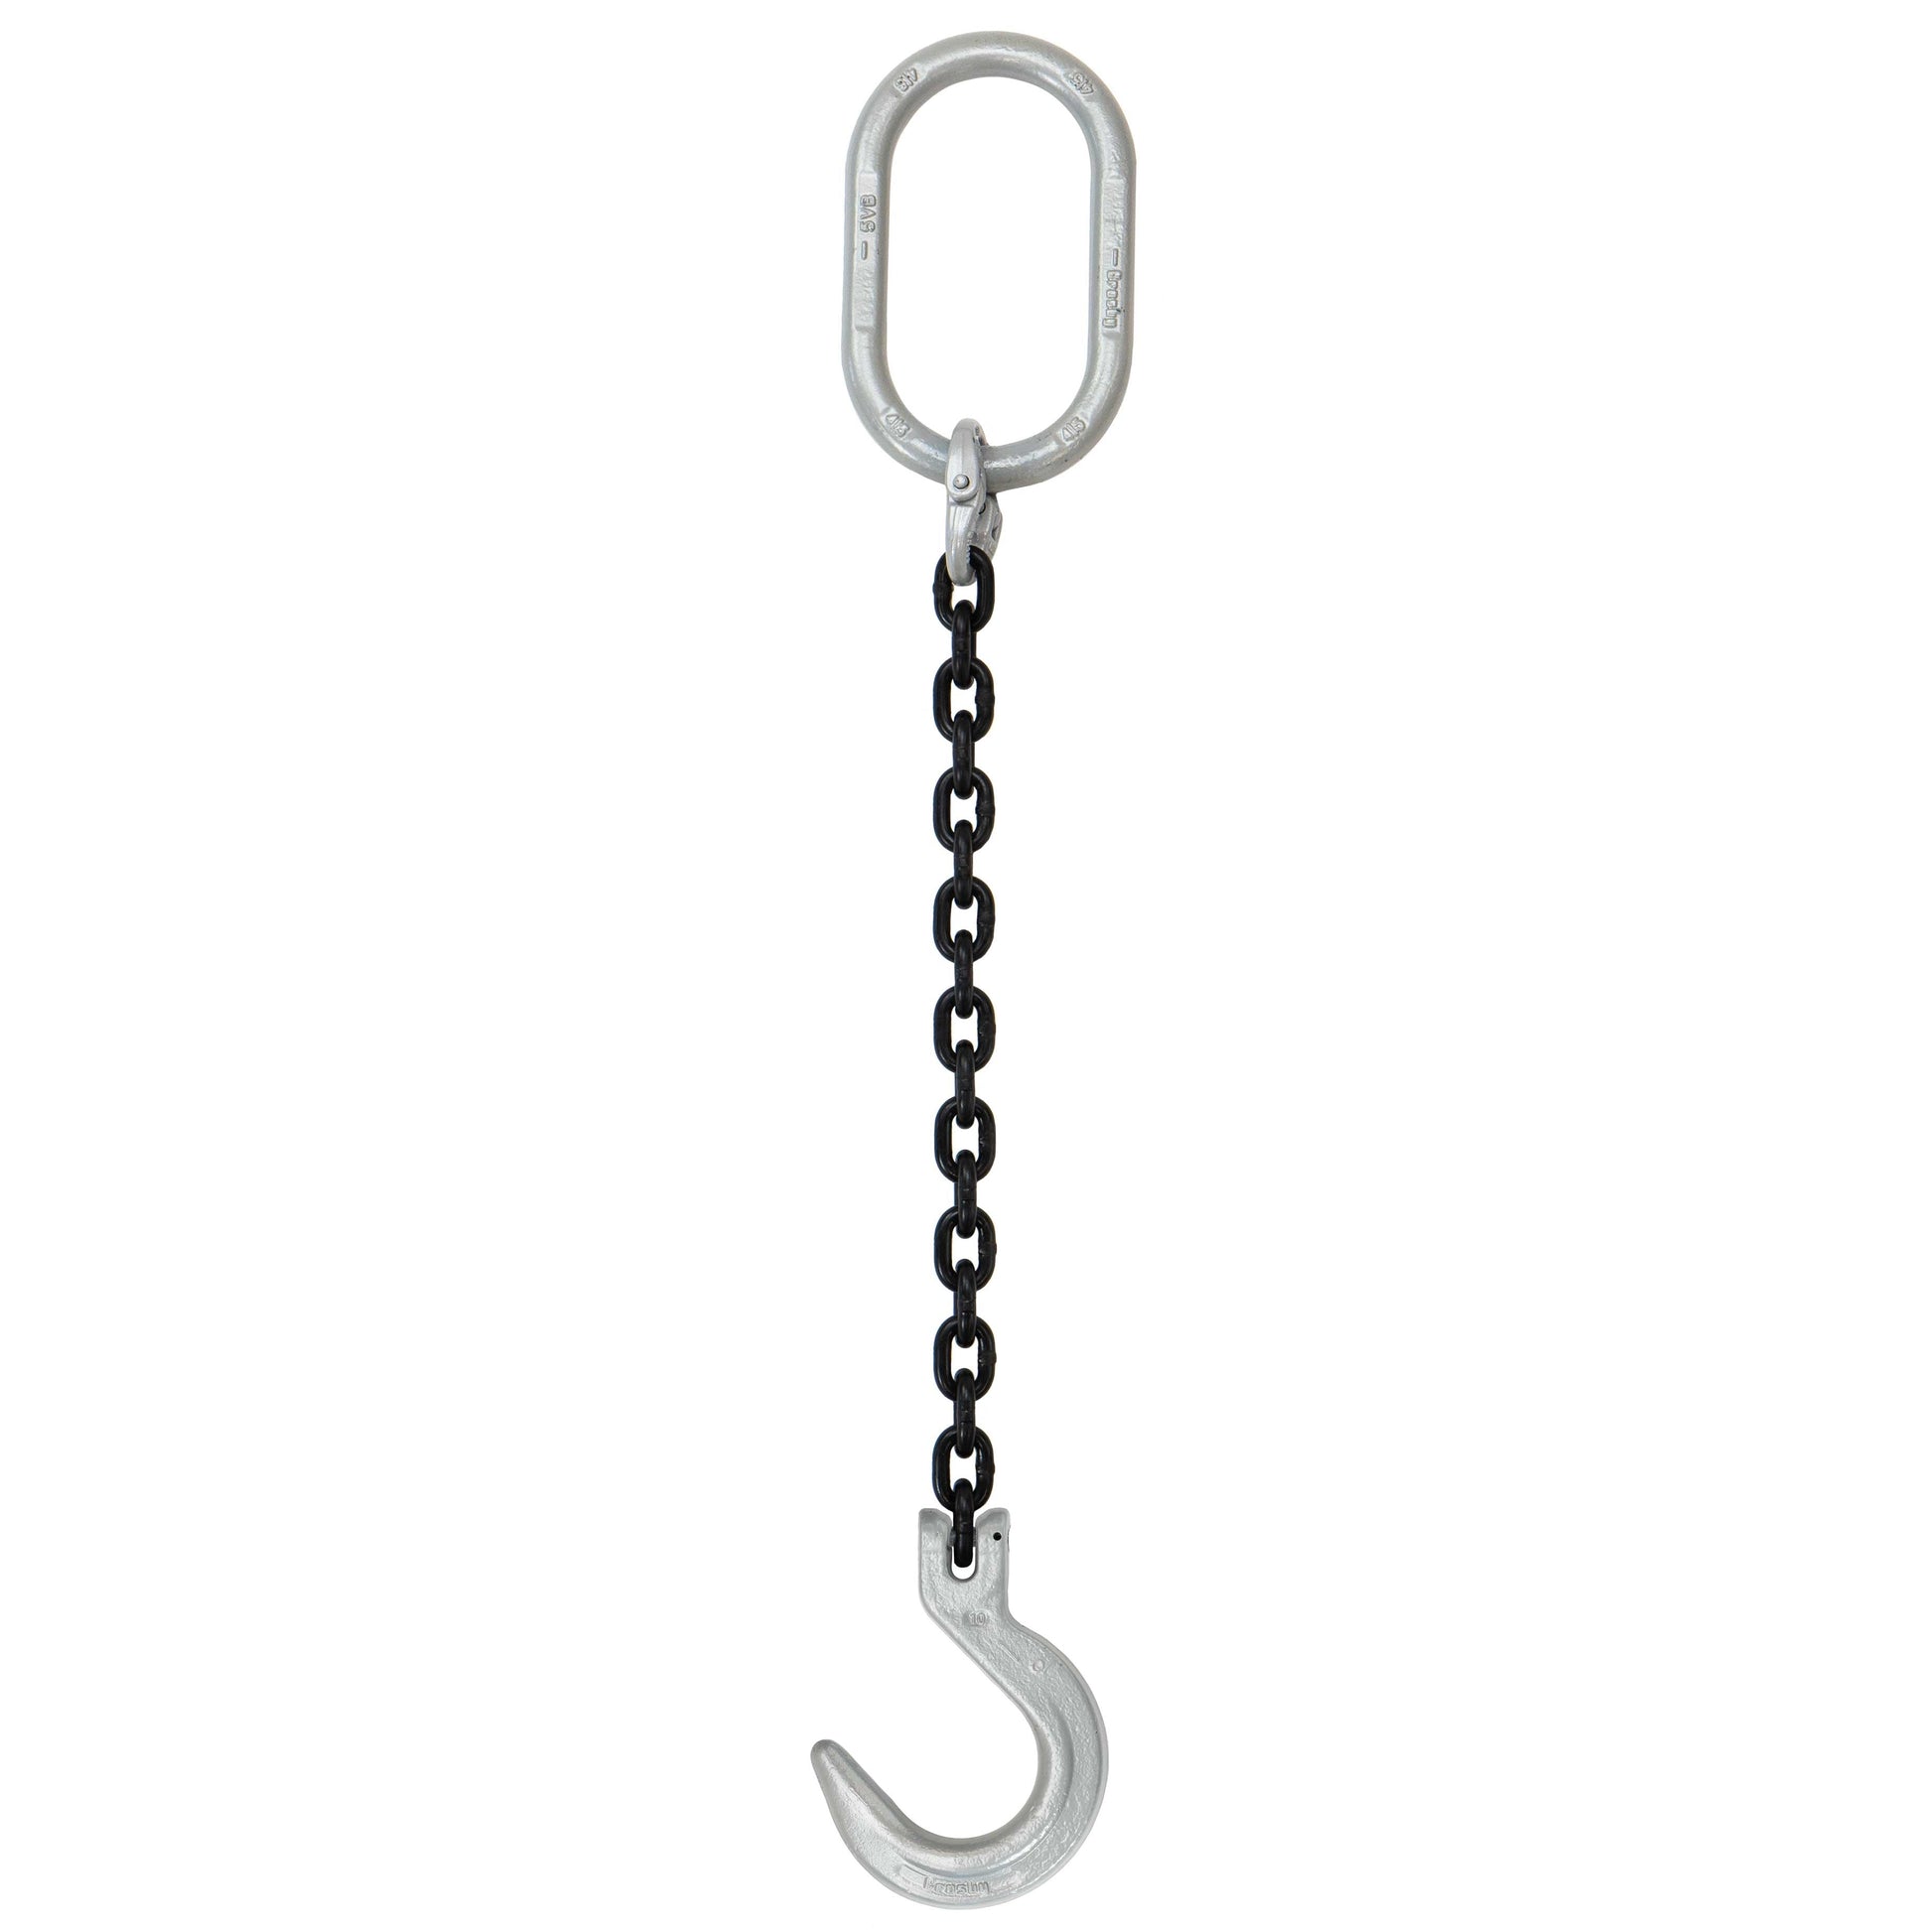 38 inch x 3 foot Domestic Single Leg Chain Sling w Crosby Foundry Hook Grade 100 image 1 of 2